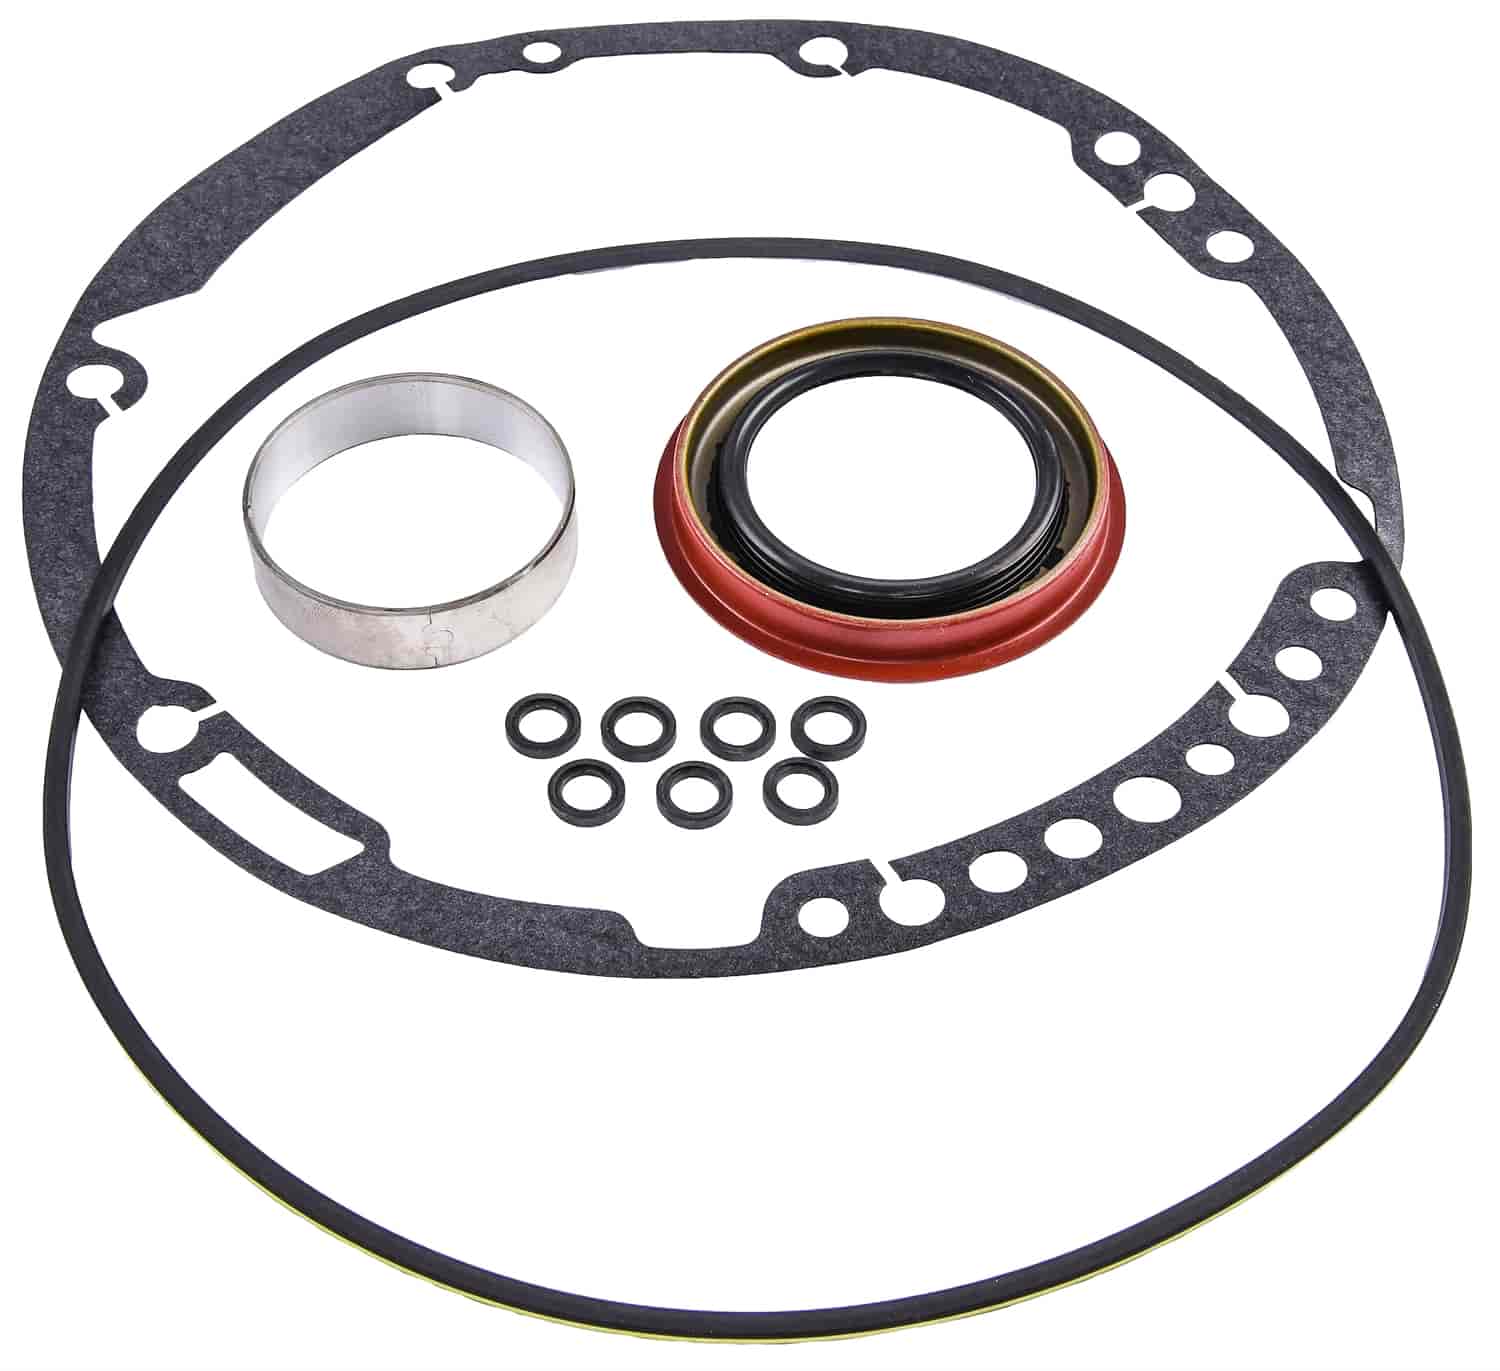 Front Pump Seal Kit for 1991 and Up GM 4L80E